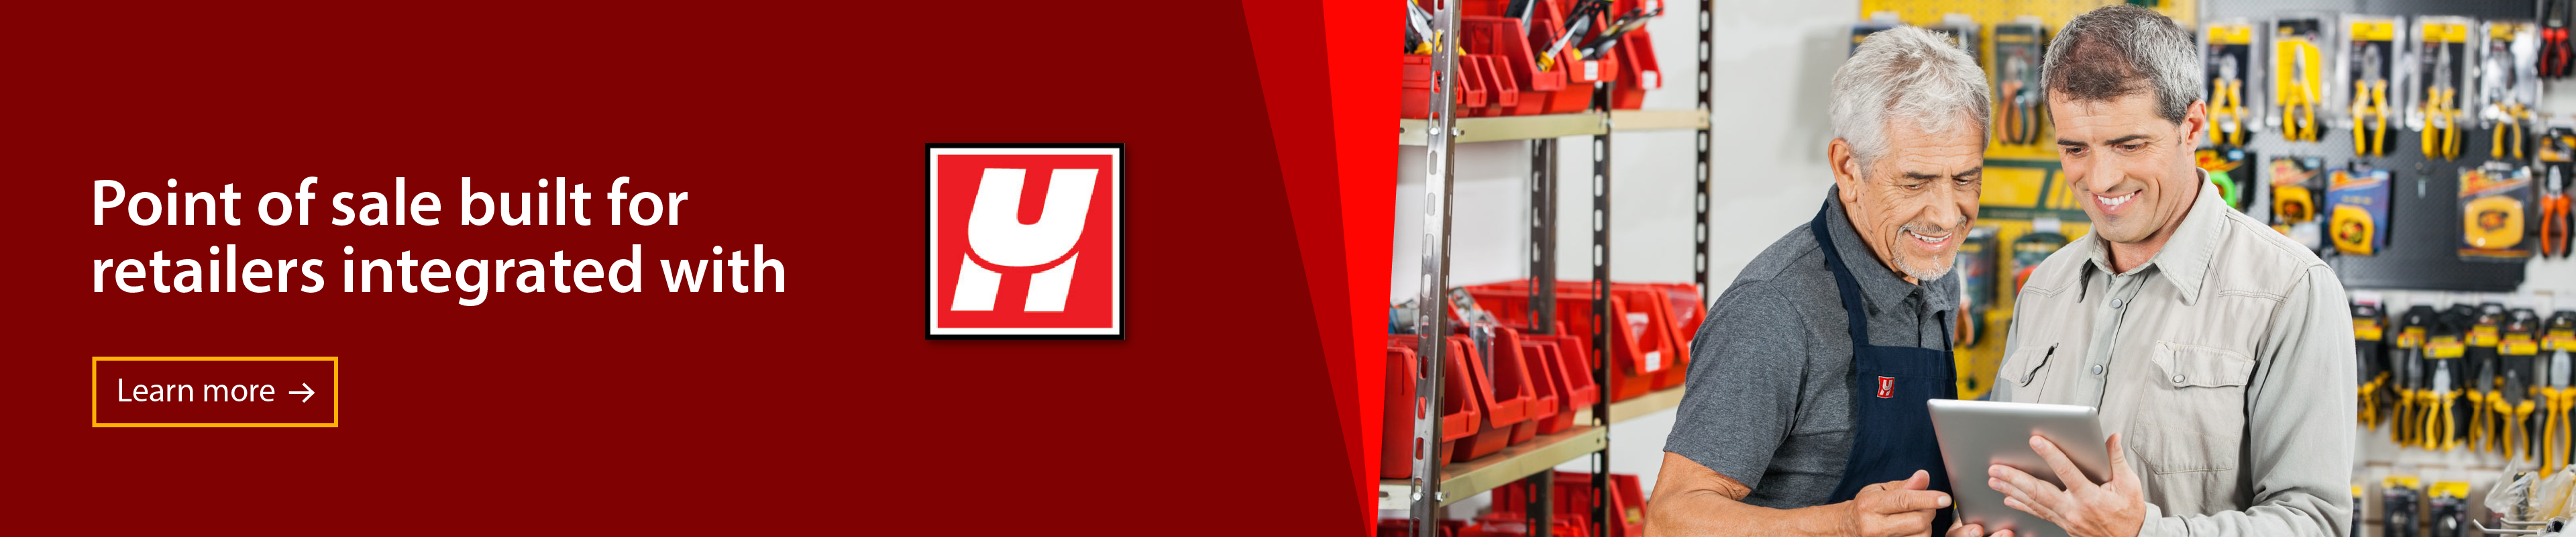 Point of sale for United Hardware retailers. Learn more.